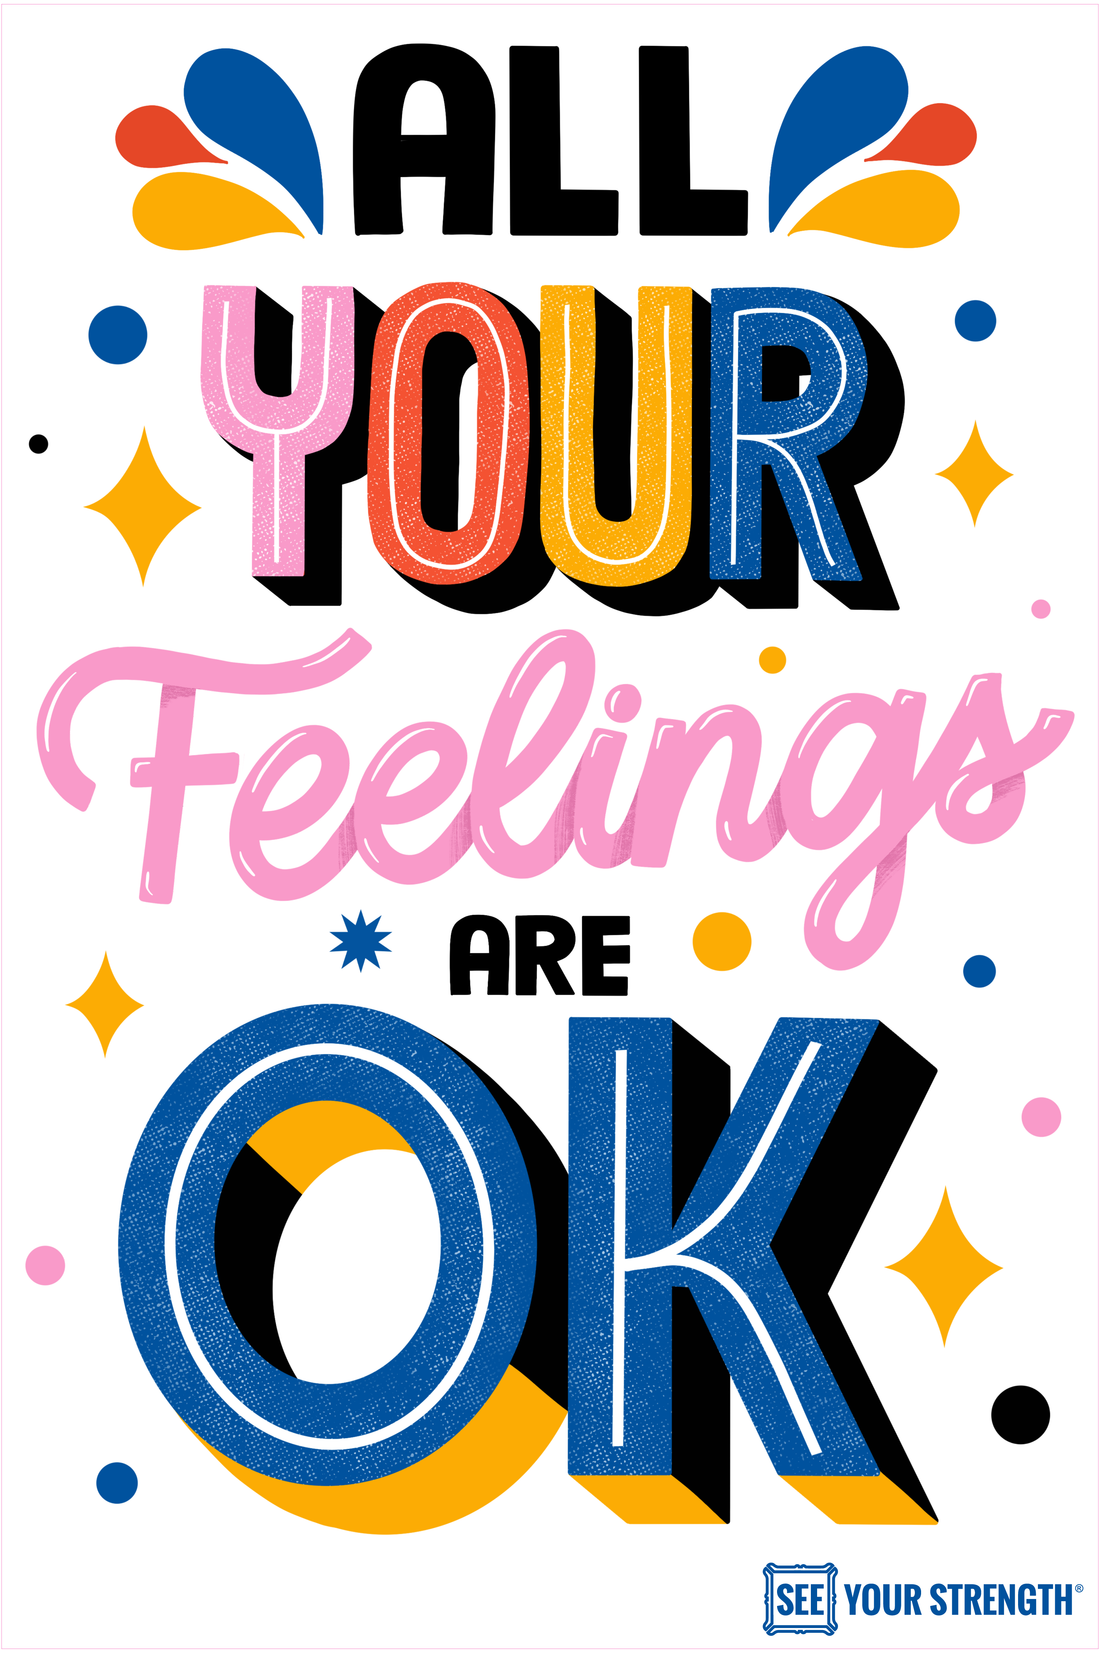 All your feelings are ok